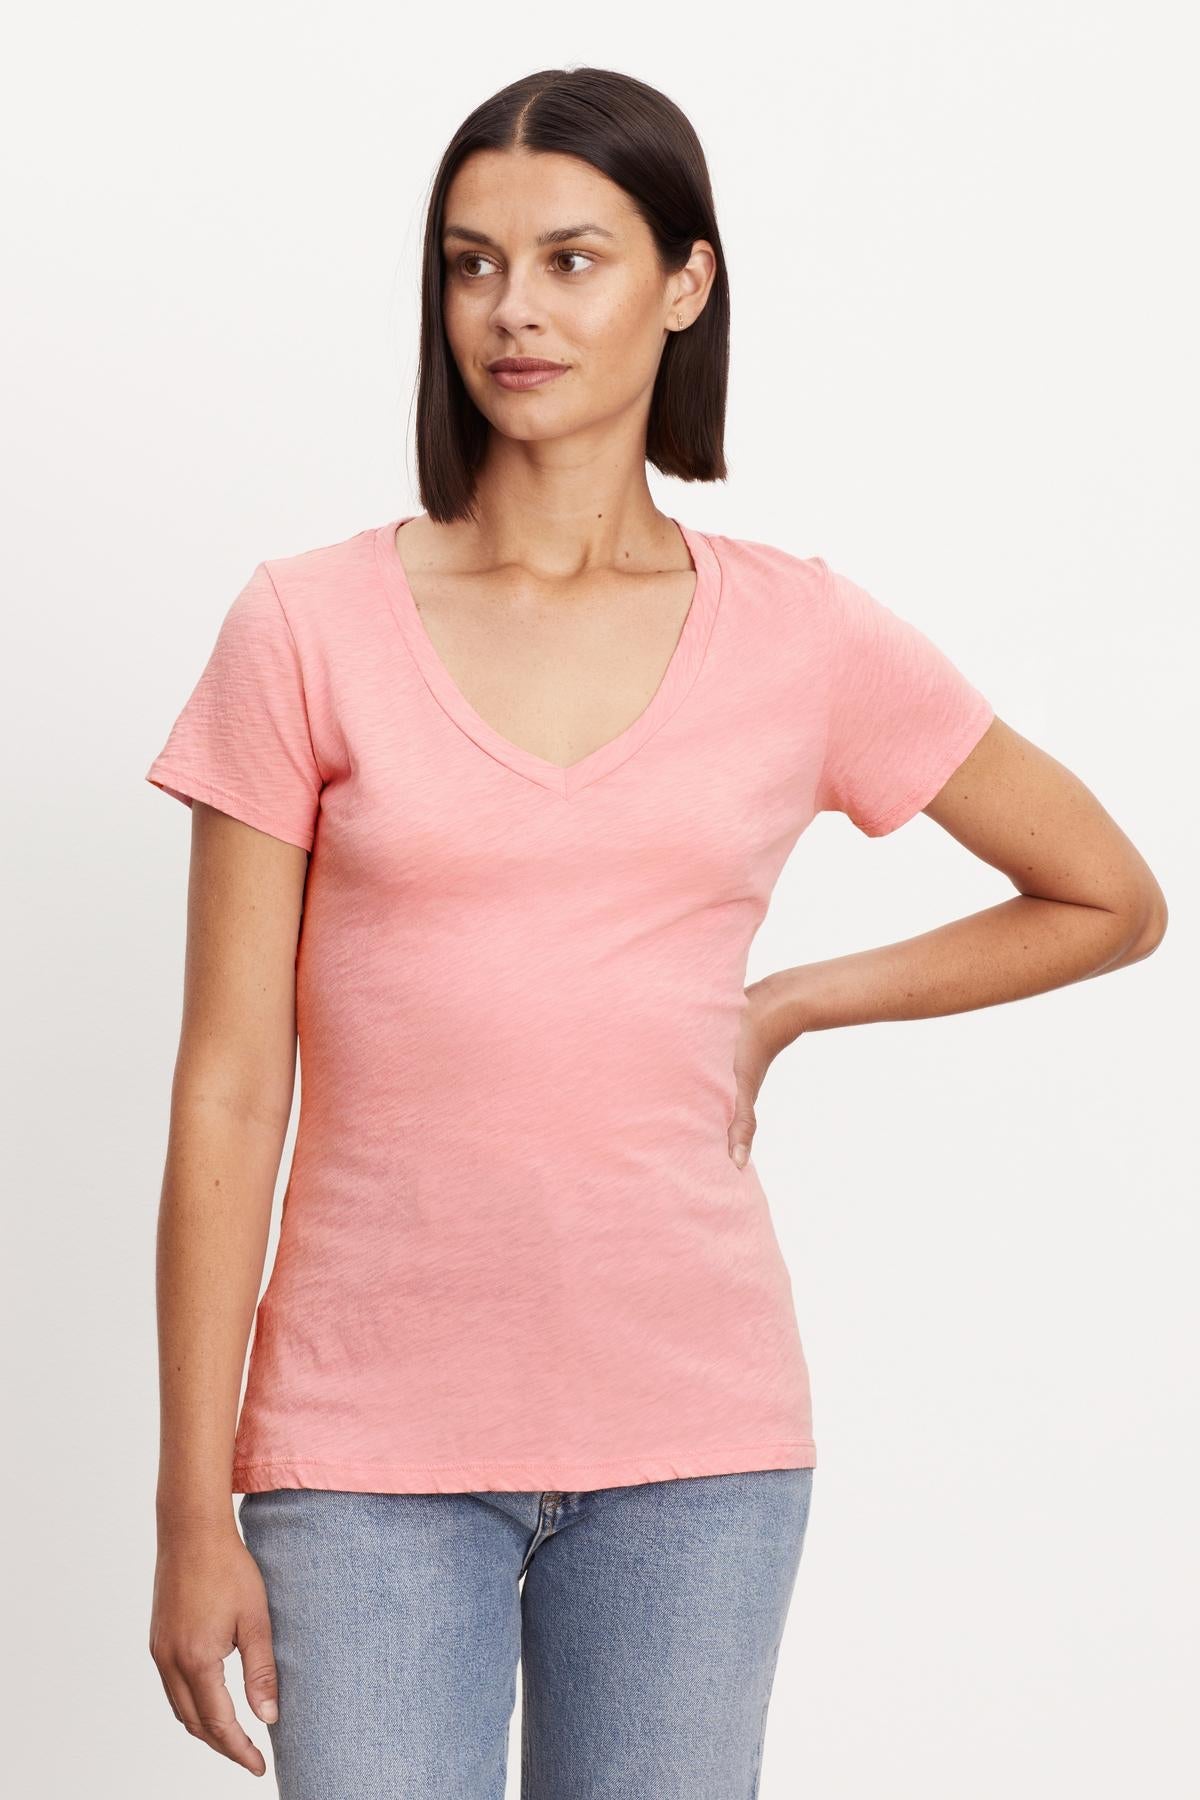   A woman sporting a preppy tomboy style in a pink LILITH COTTON SLUB V-NECK TEE by Velvet by Graham & Spencer. 